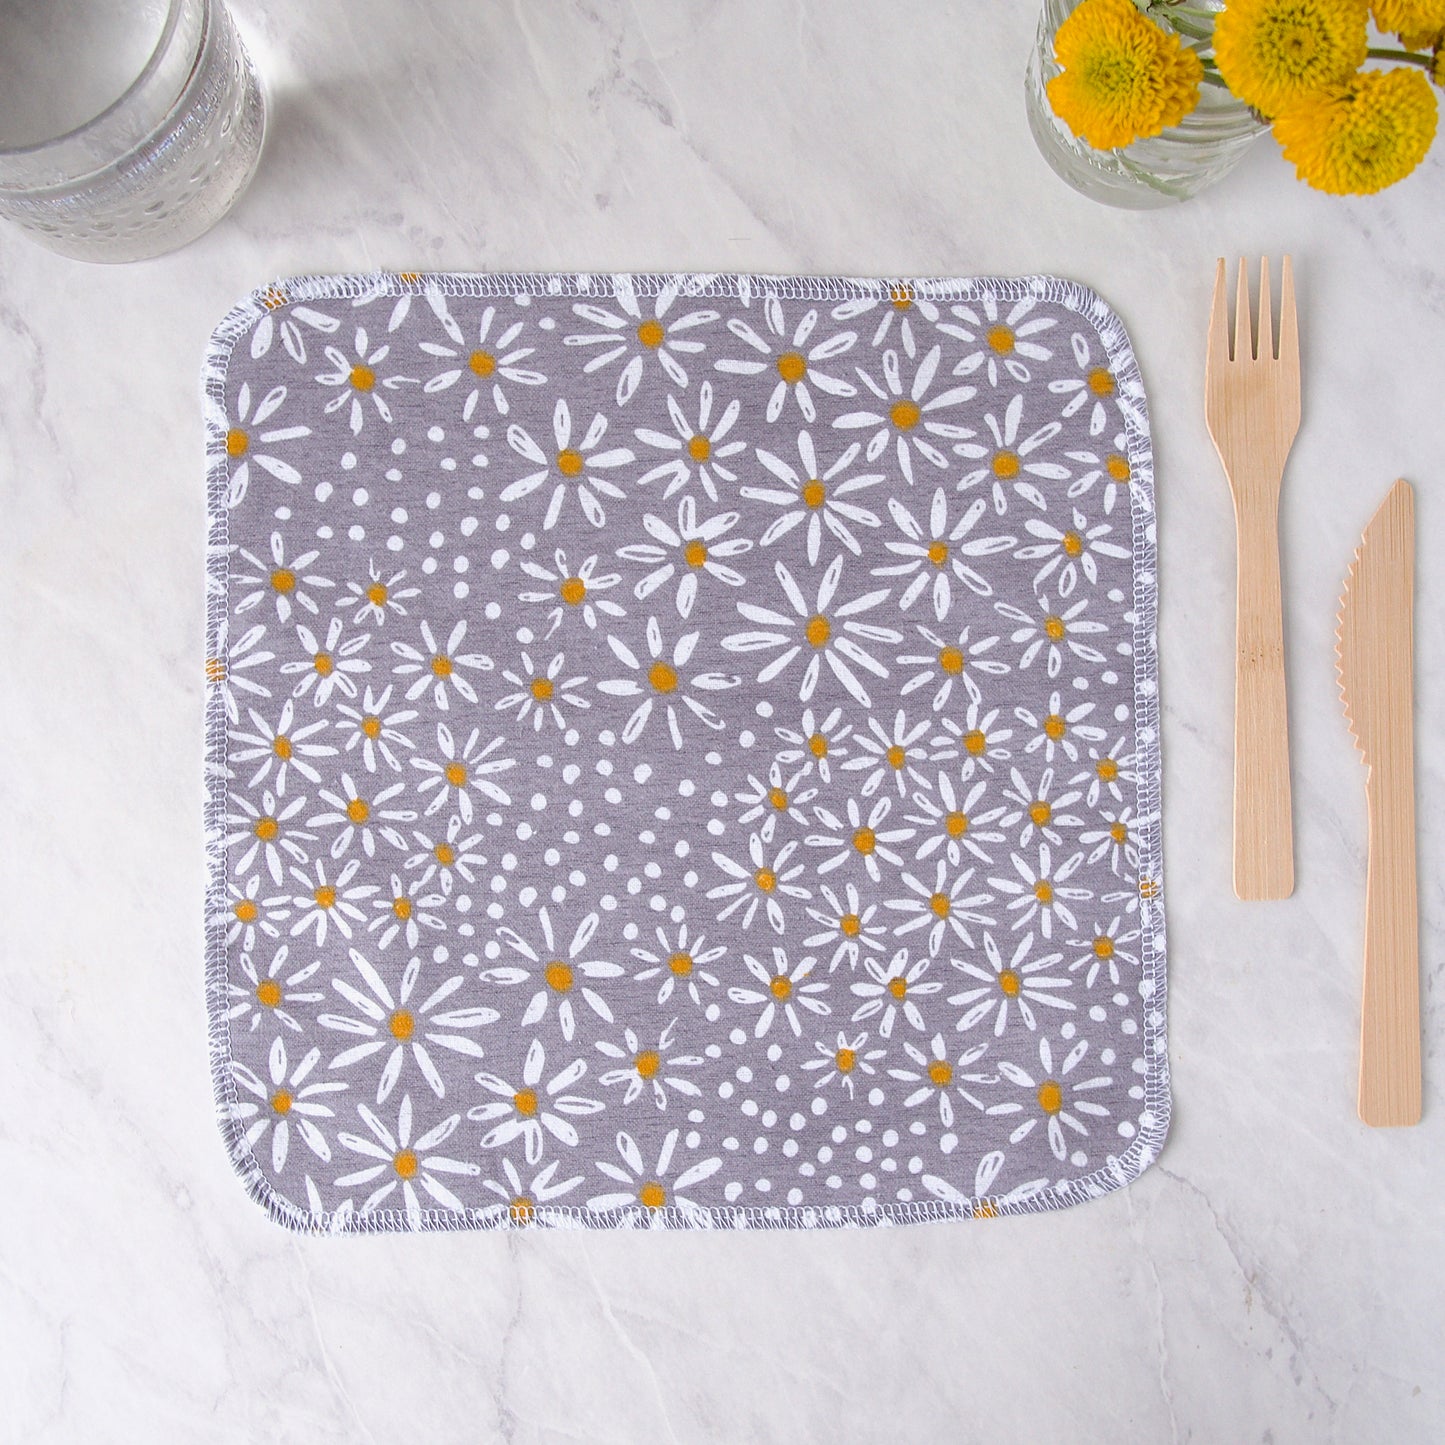 Reusable Cloth Napkins in Tiny Daisies on Gray